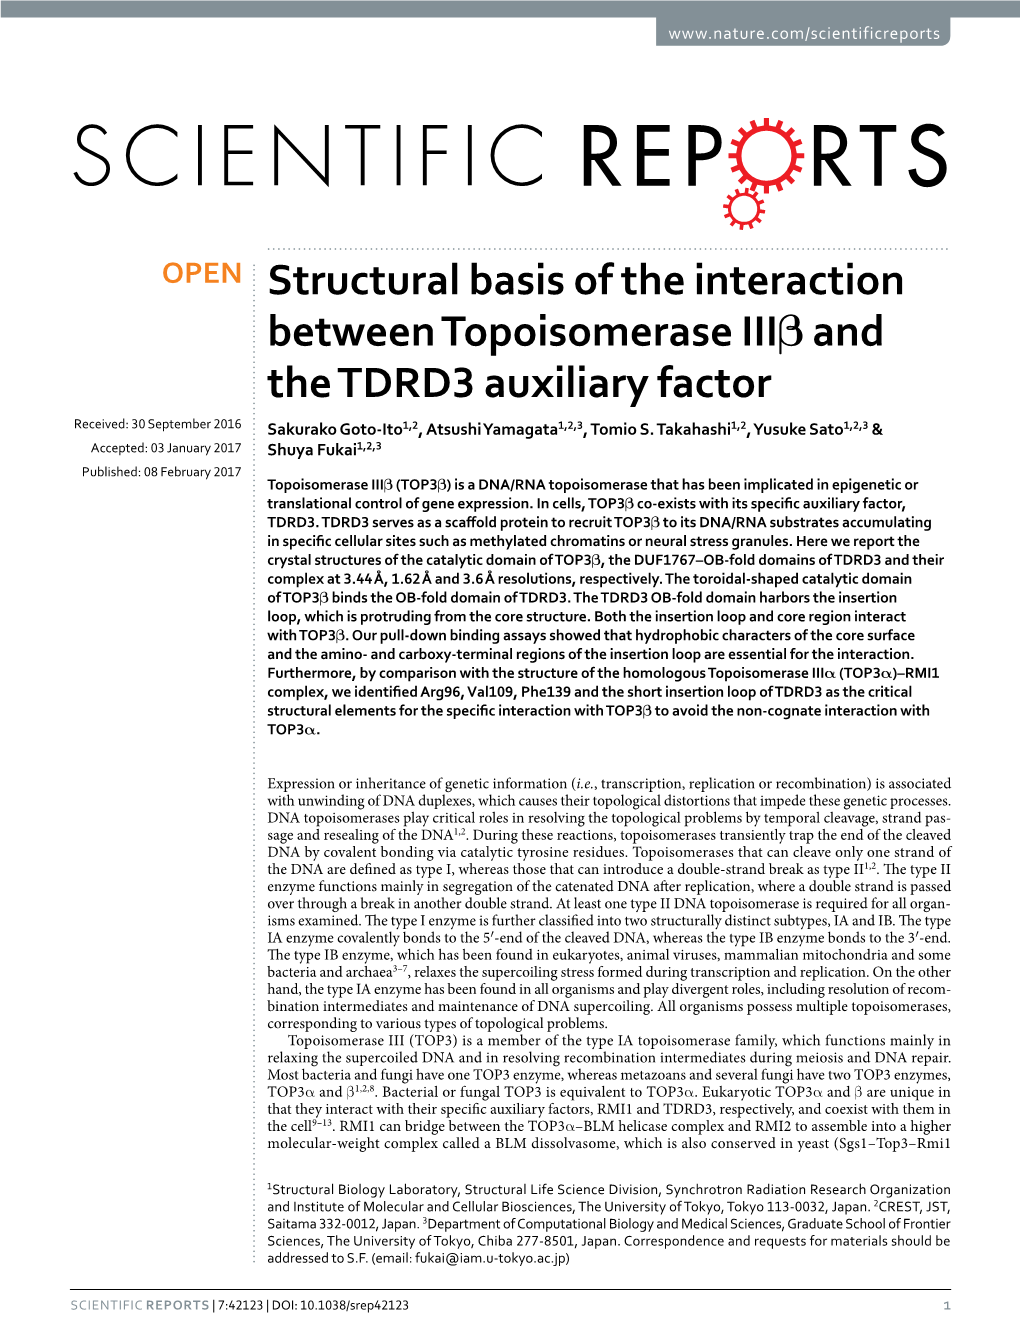 Structural Basis of the Interaction Between Topoisomerase Iiiβ And